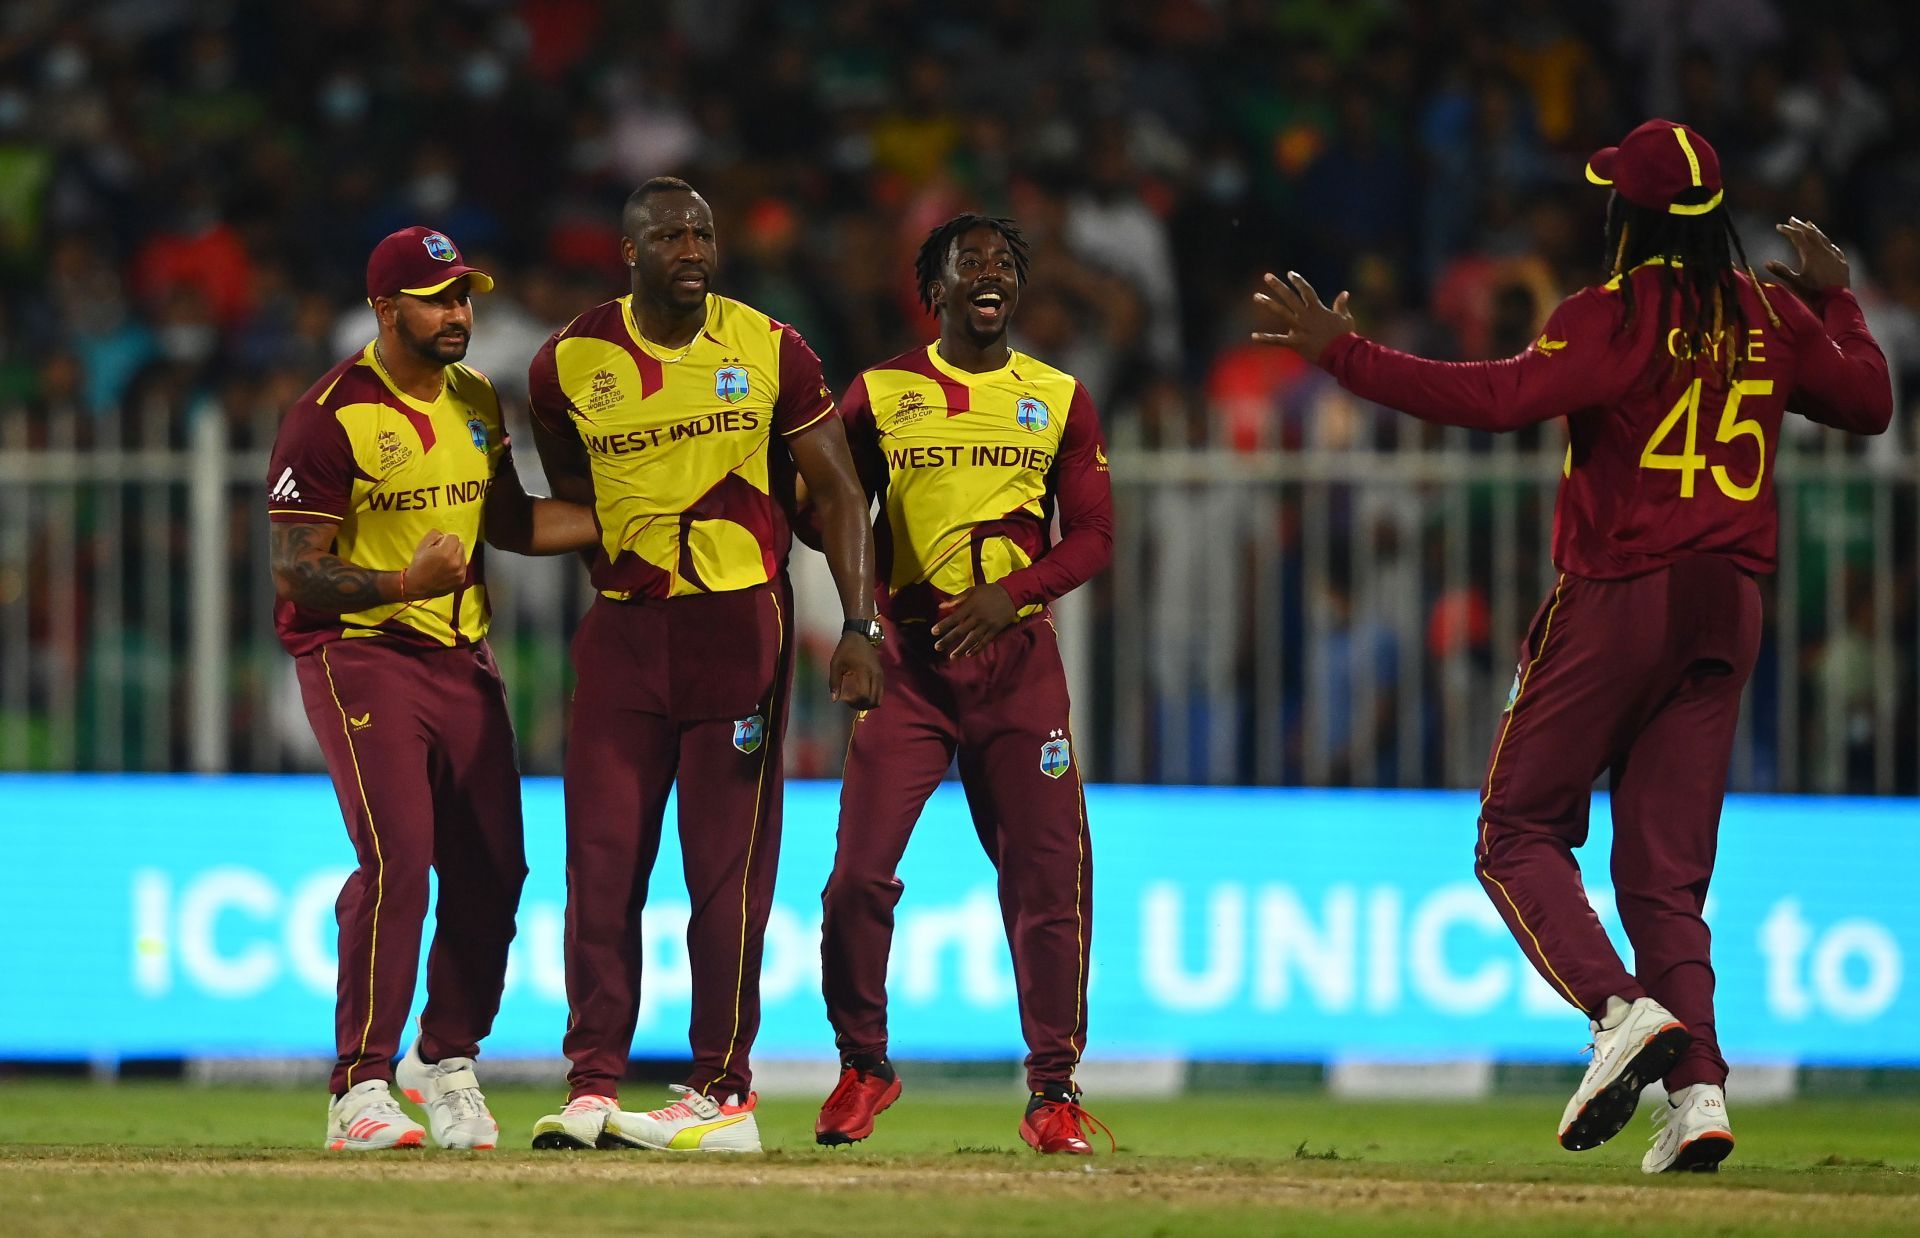 West Indies are almost out of the T20 World Cup 2021